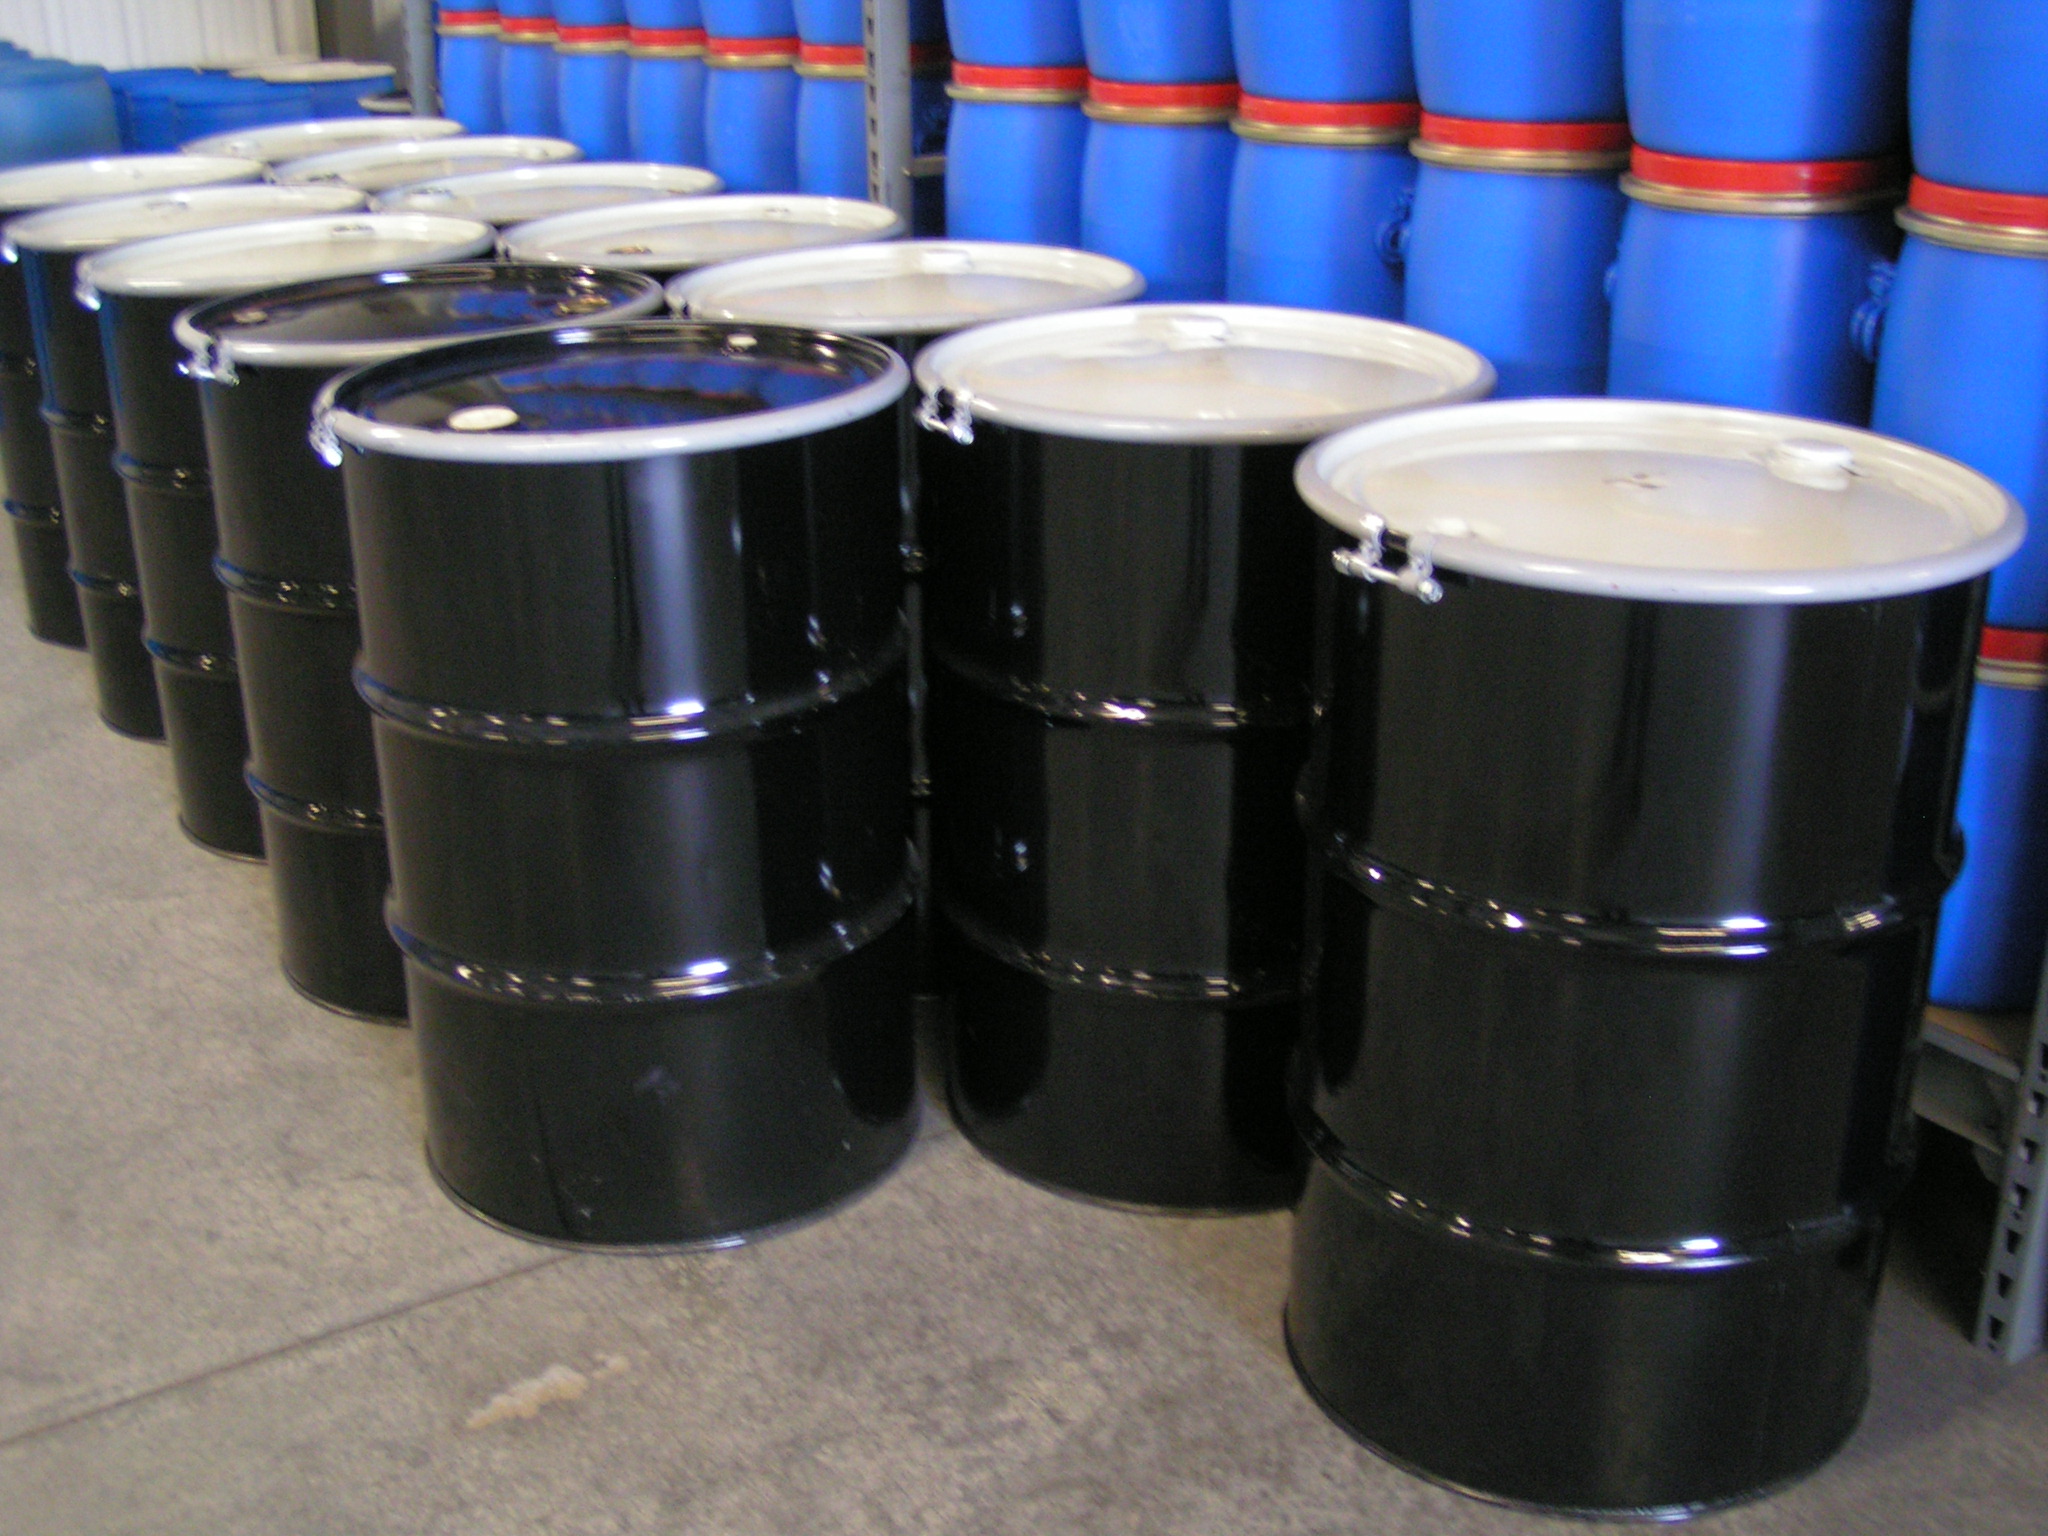 New Steel Drums New Metal Drums In 55 Gallon Size New 55 Gallon.